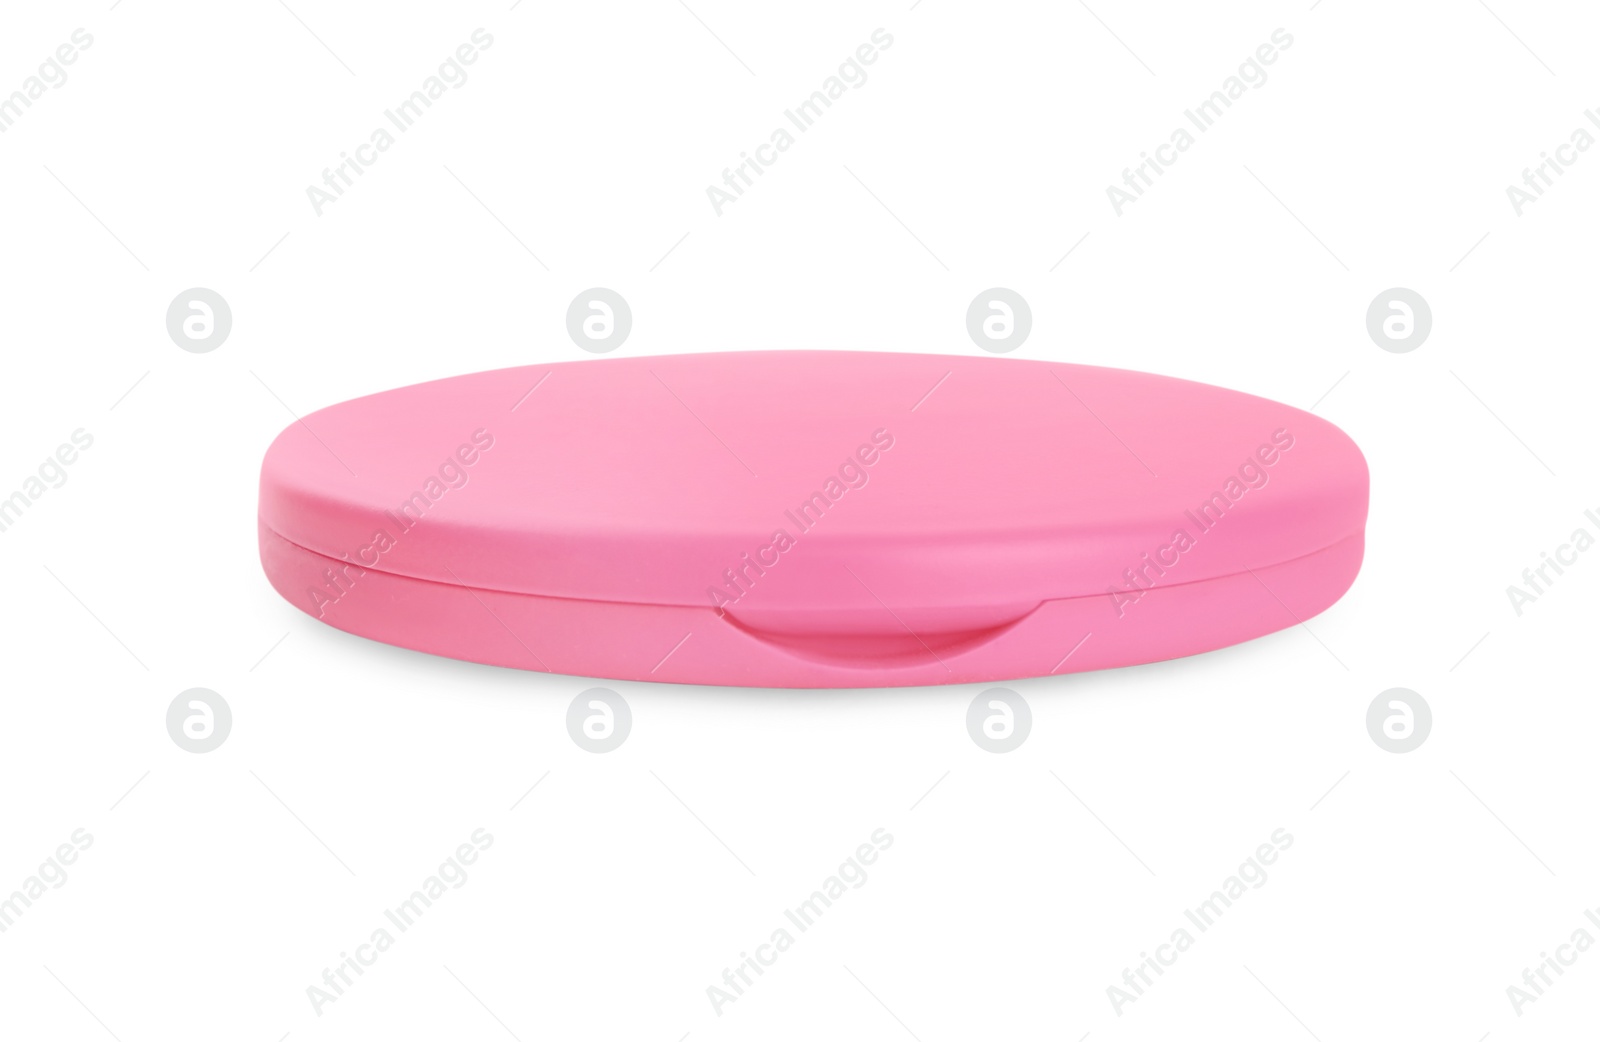 Photo of Pink cosmetic pocket mirror isolated on white